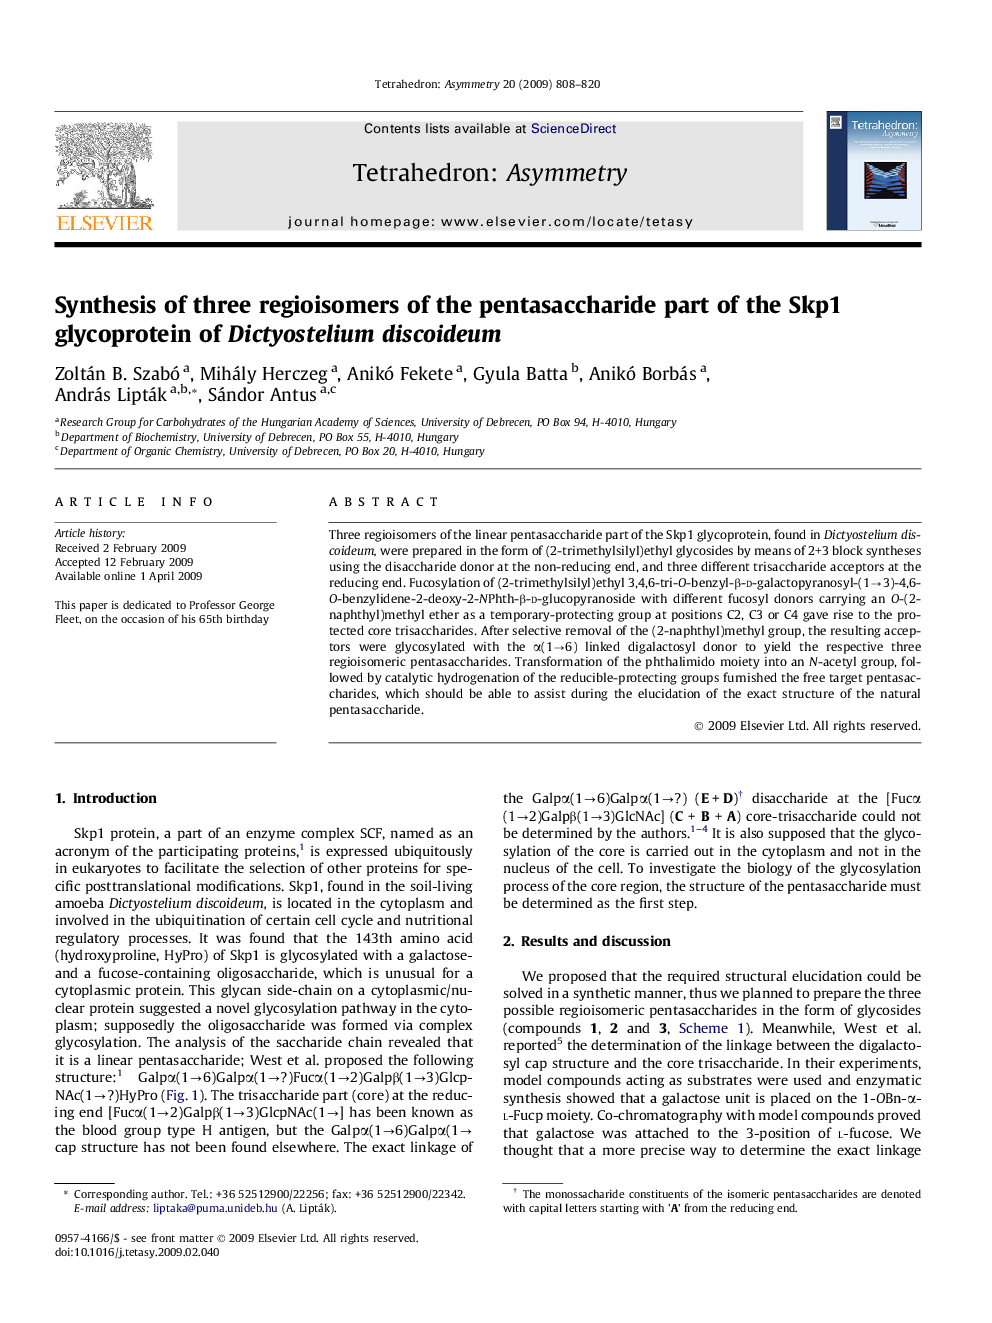 Synthesis of three regioisomers of the pentasaccharide part of the Skp1 glycoprotein of Dictyostelium discoideum